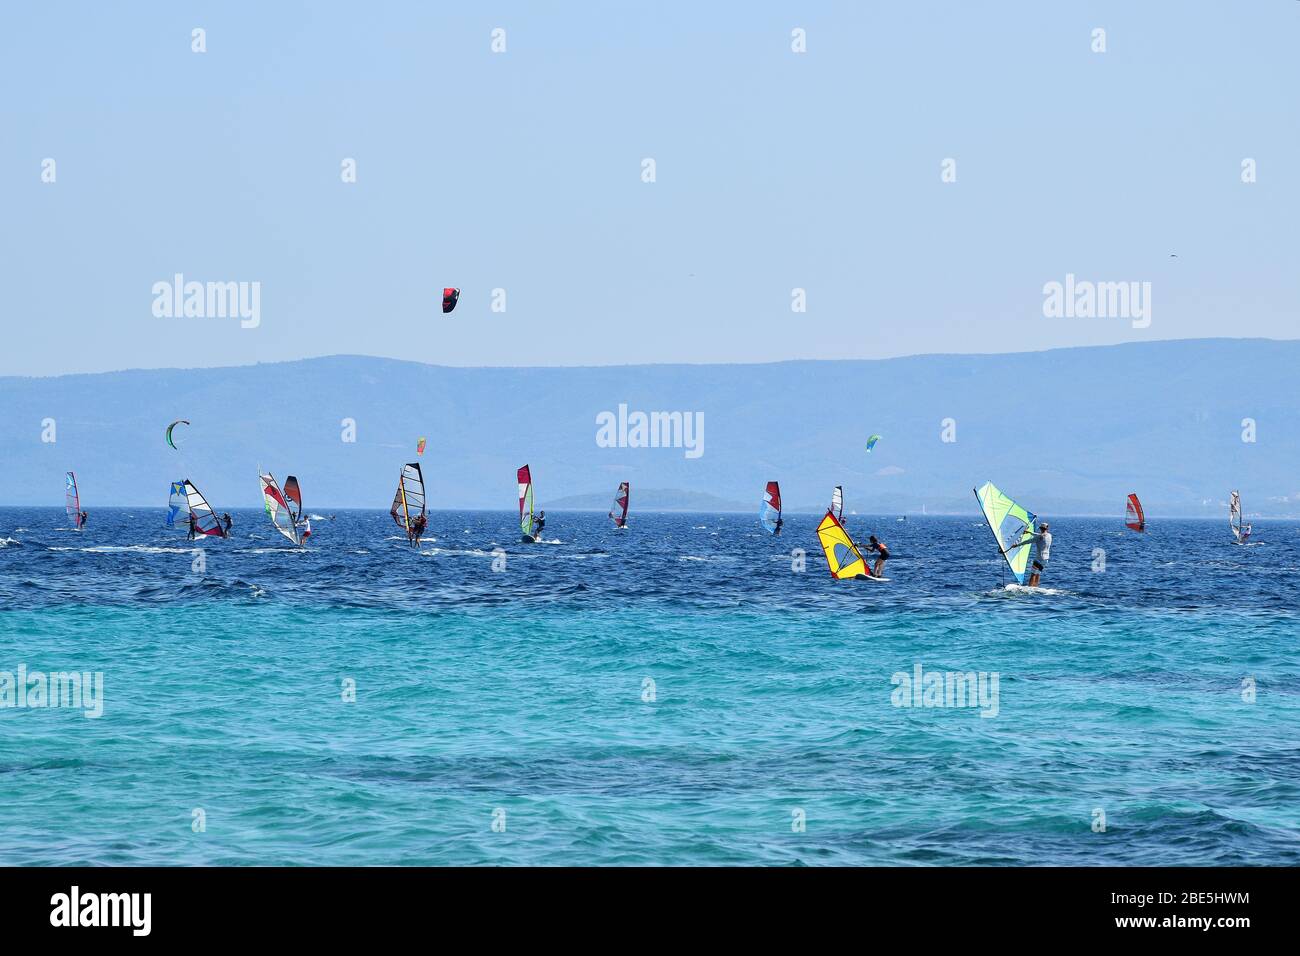 People are having an active pastime on vacation. Surfing on an Adriatic sea in Croatia. Stock Photo